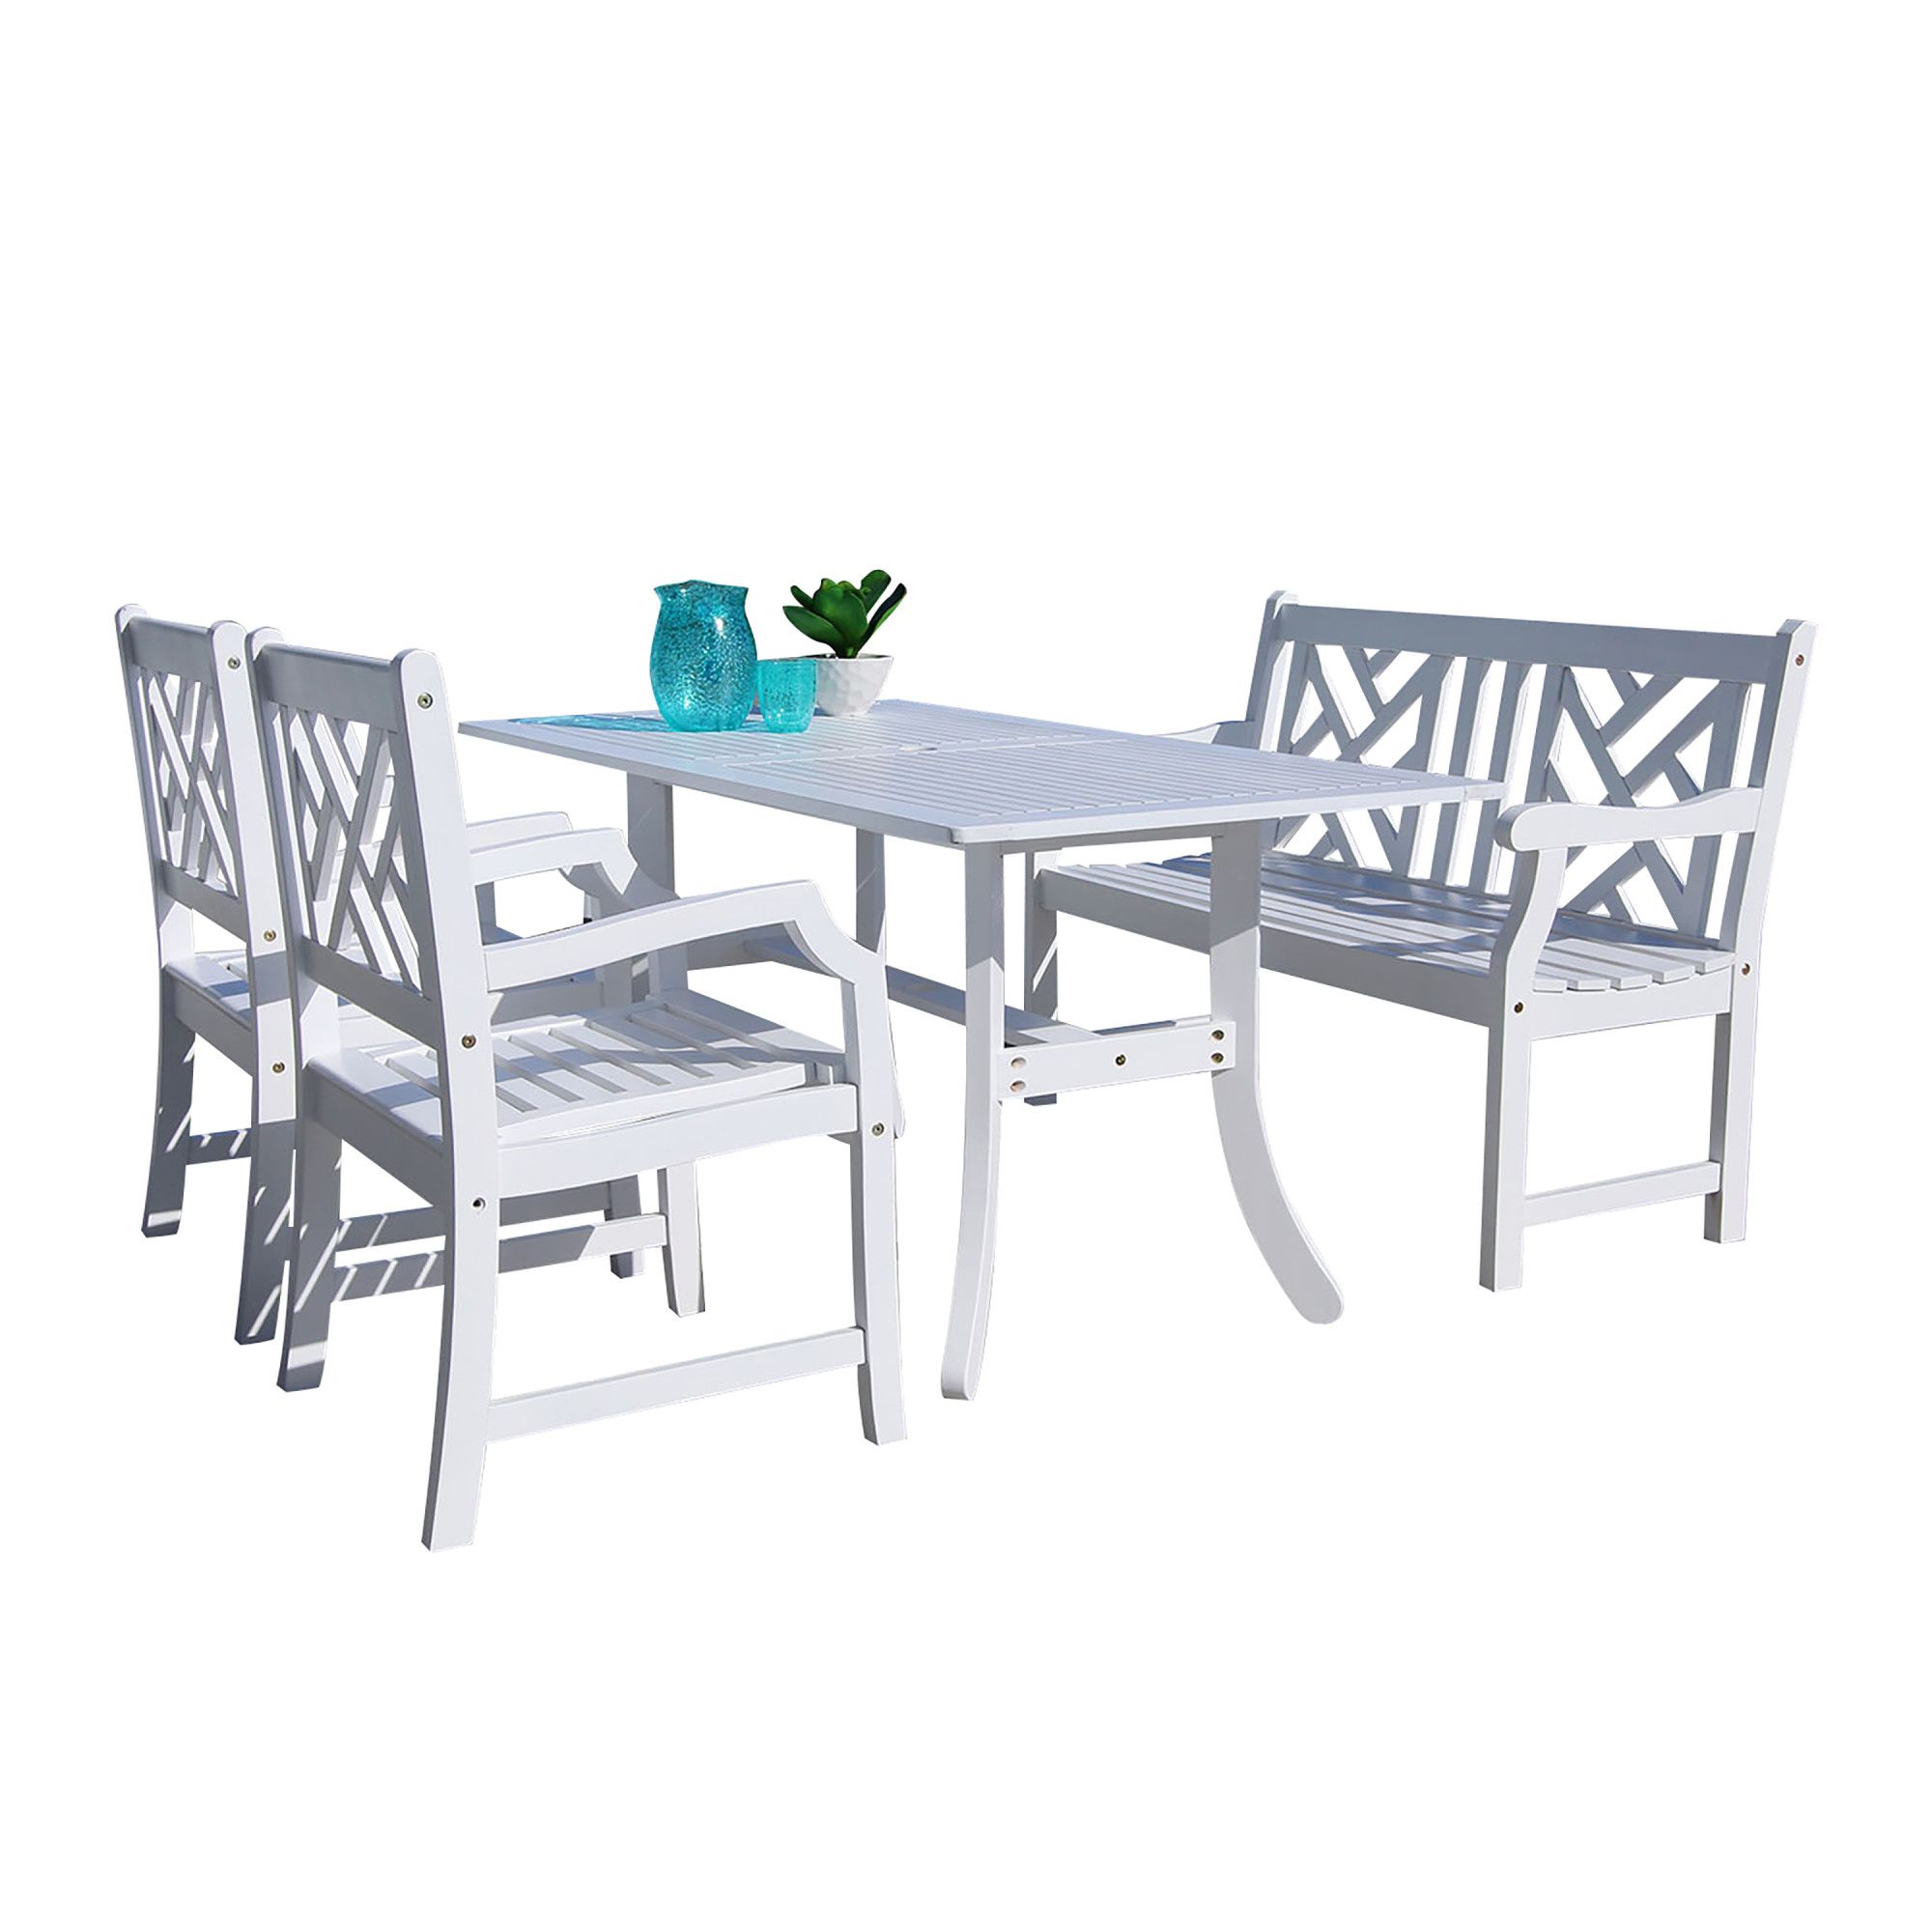 Popular Bradley Outdoor 4 Piece Wood Patio Dining Set With 4 Foot Bench In Throughout White 4 Piece Outdoor Seating Patio Sets (View 8 of 15)